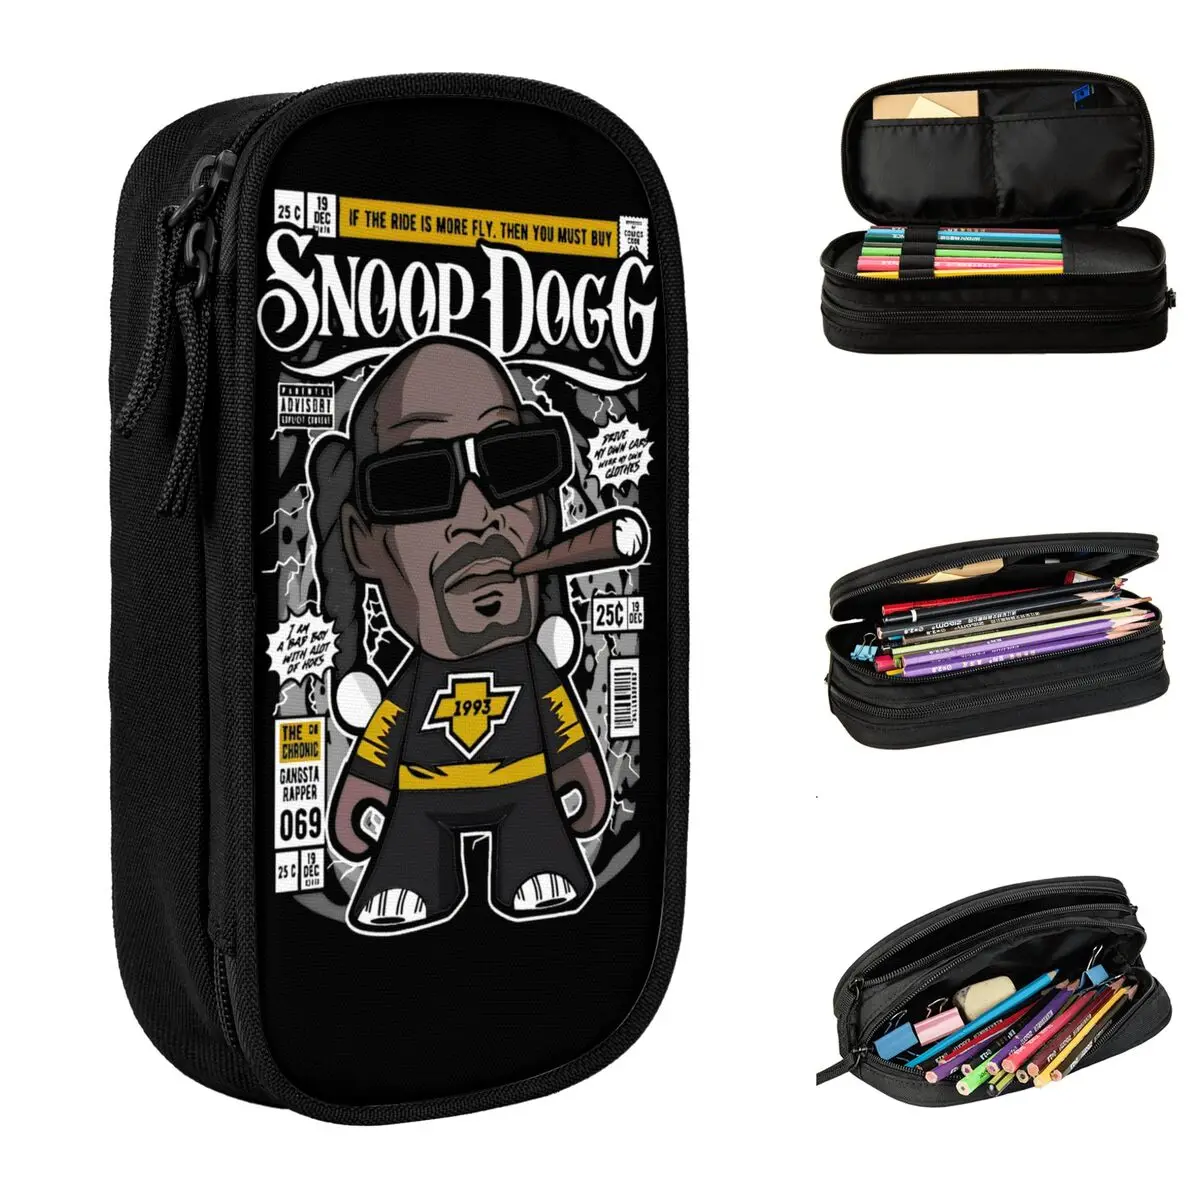 

Cute Snoop Dogg Rapper Hip Hop Dog Pencil Cases Pencilcases Pen Holder Kids Large Storage Bag Students School Gifts Accessories